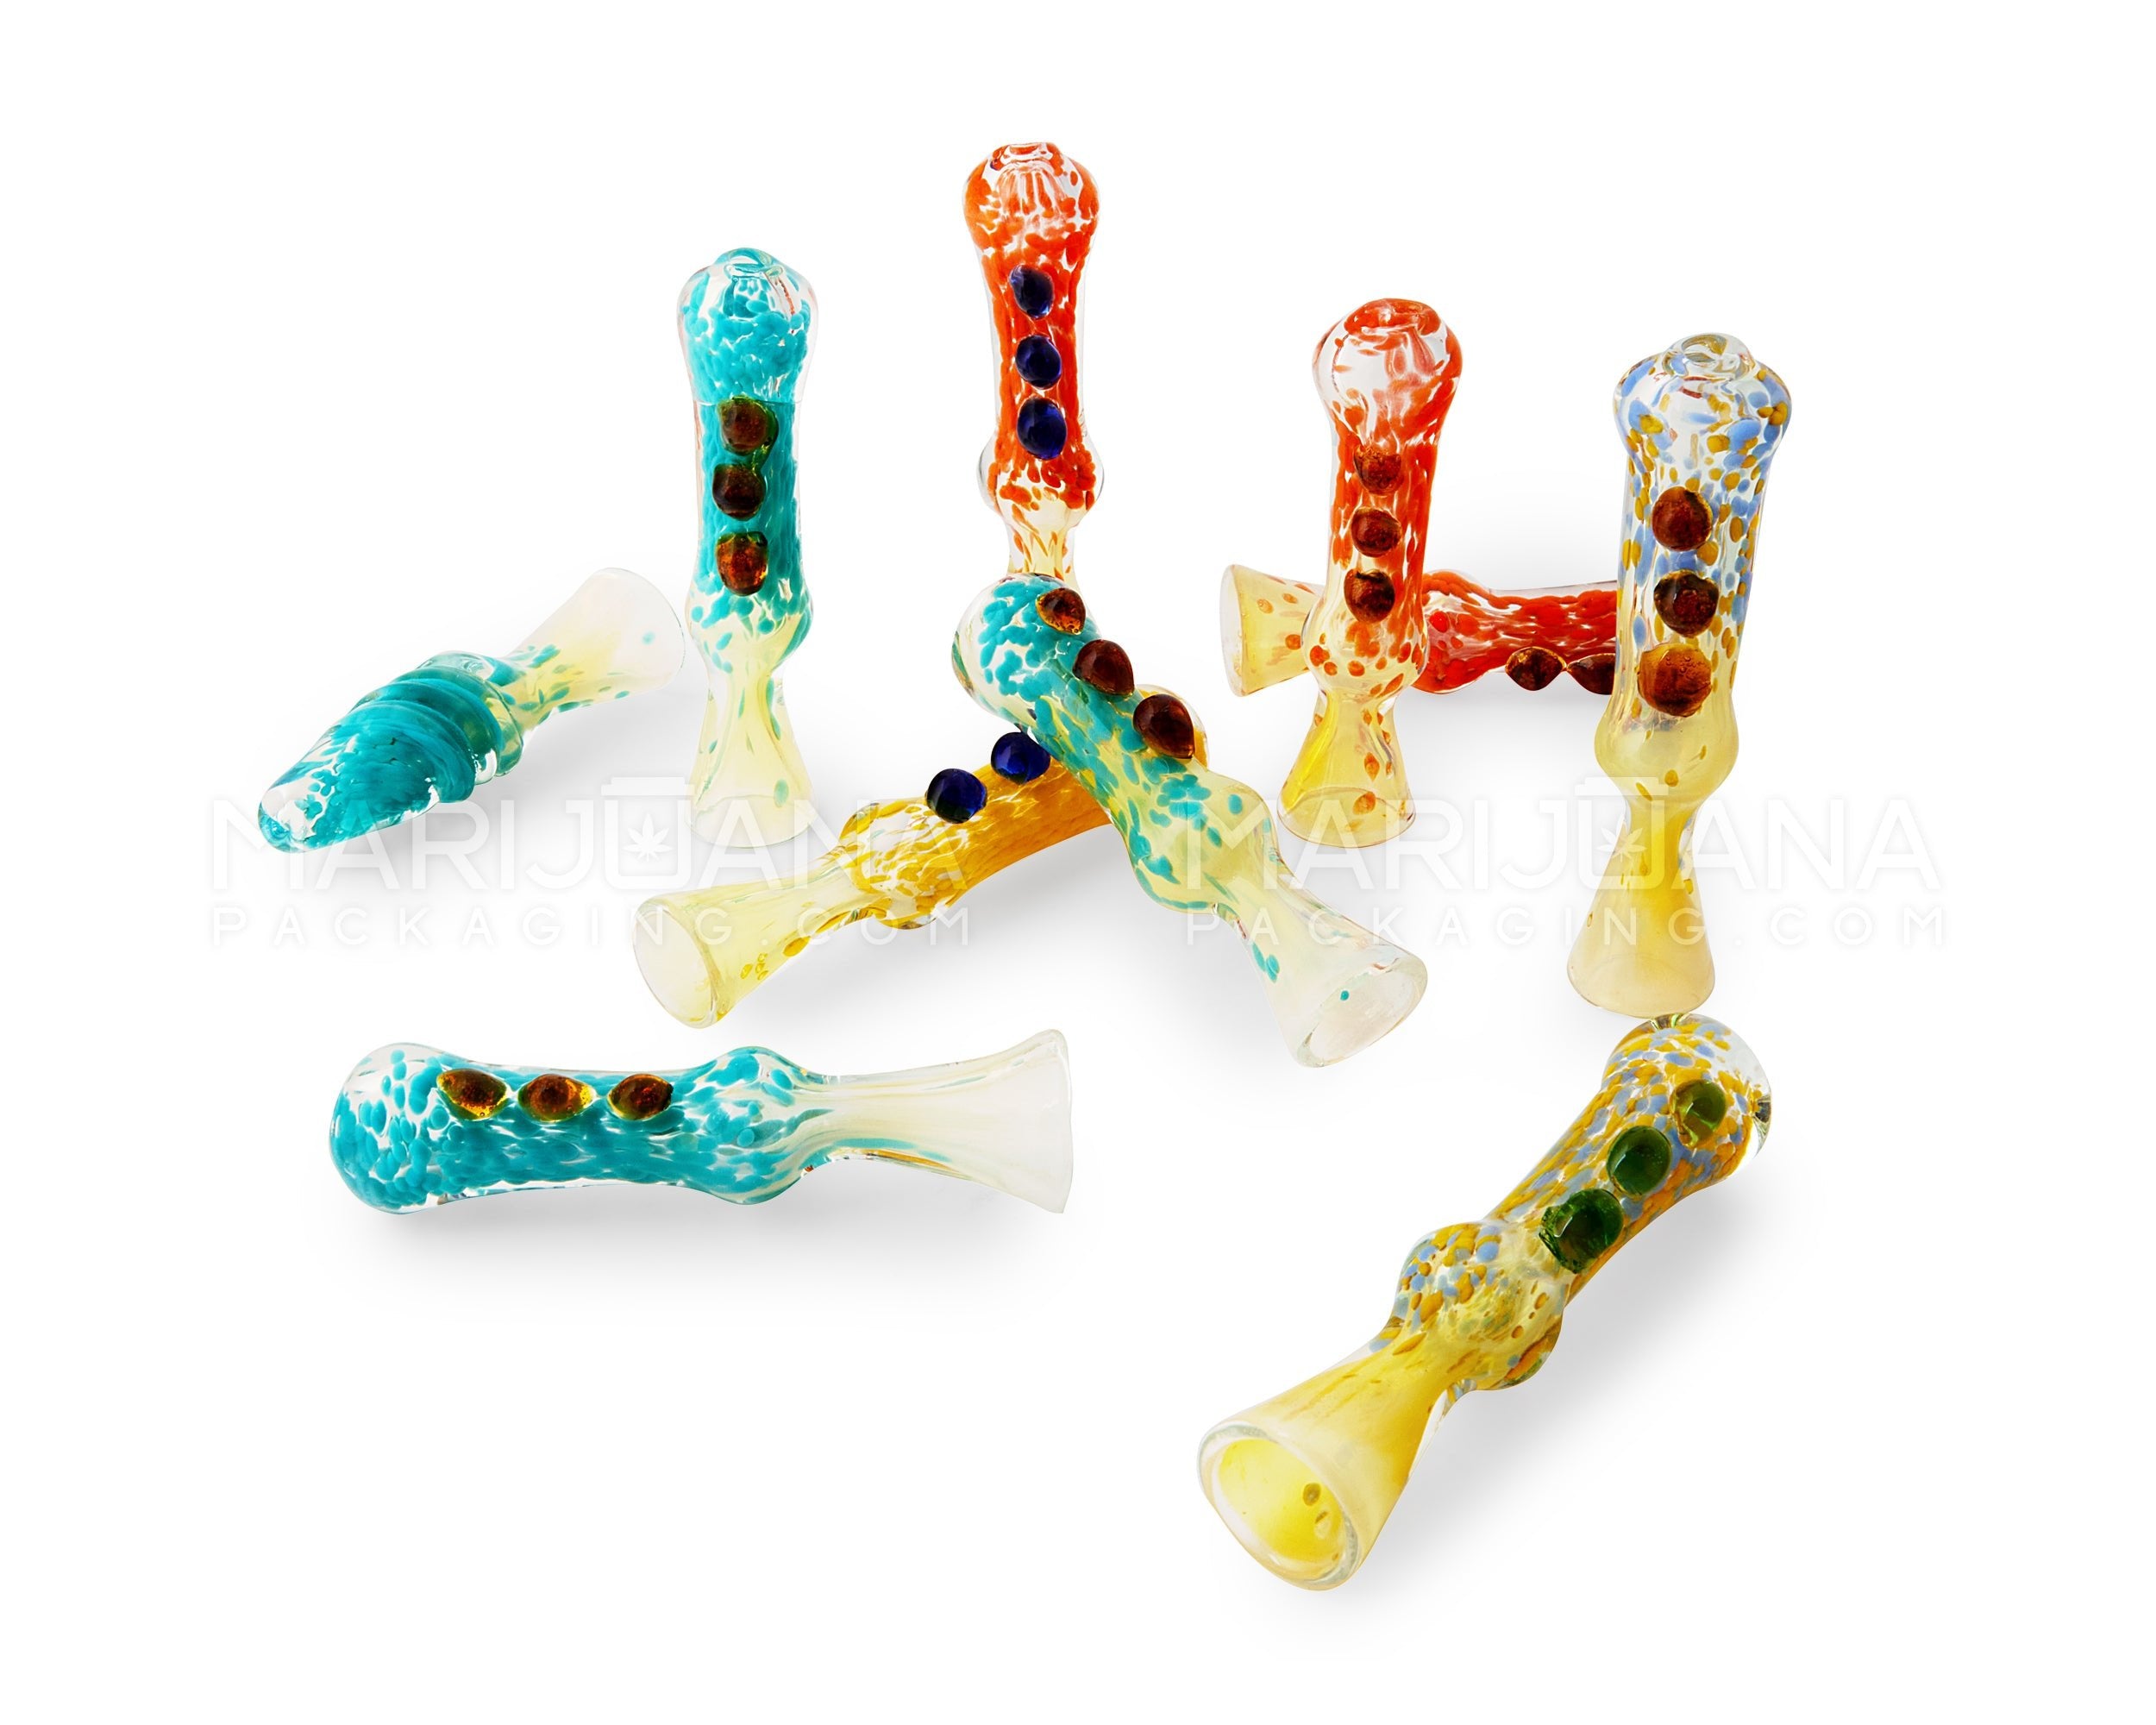 Fume Spotted Flute Chillum Hand Pipe | 3.5in Long - Glass - Assorted - 6